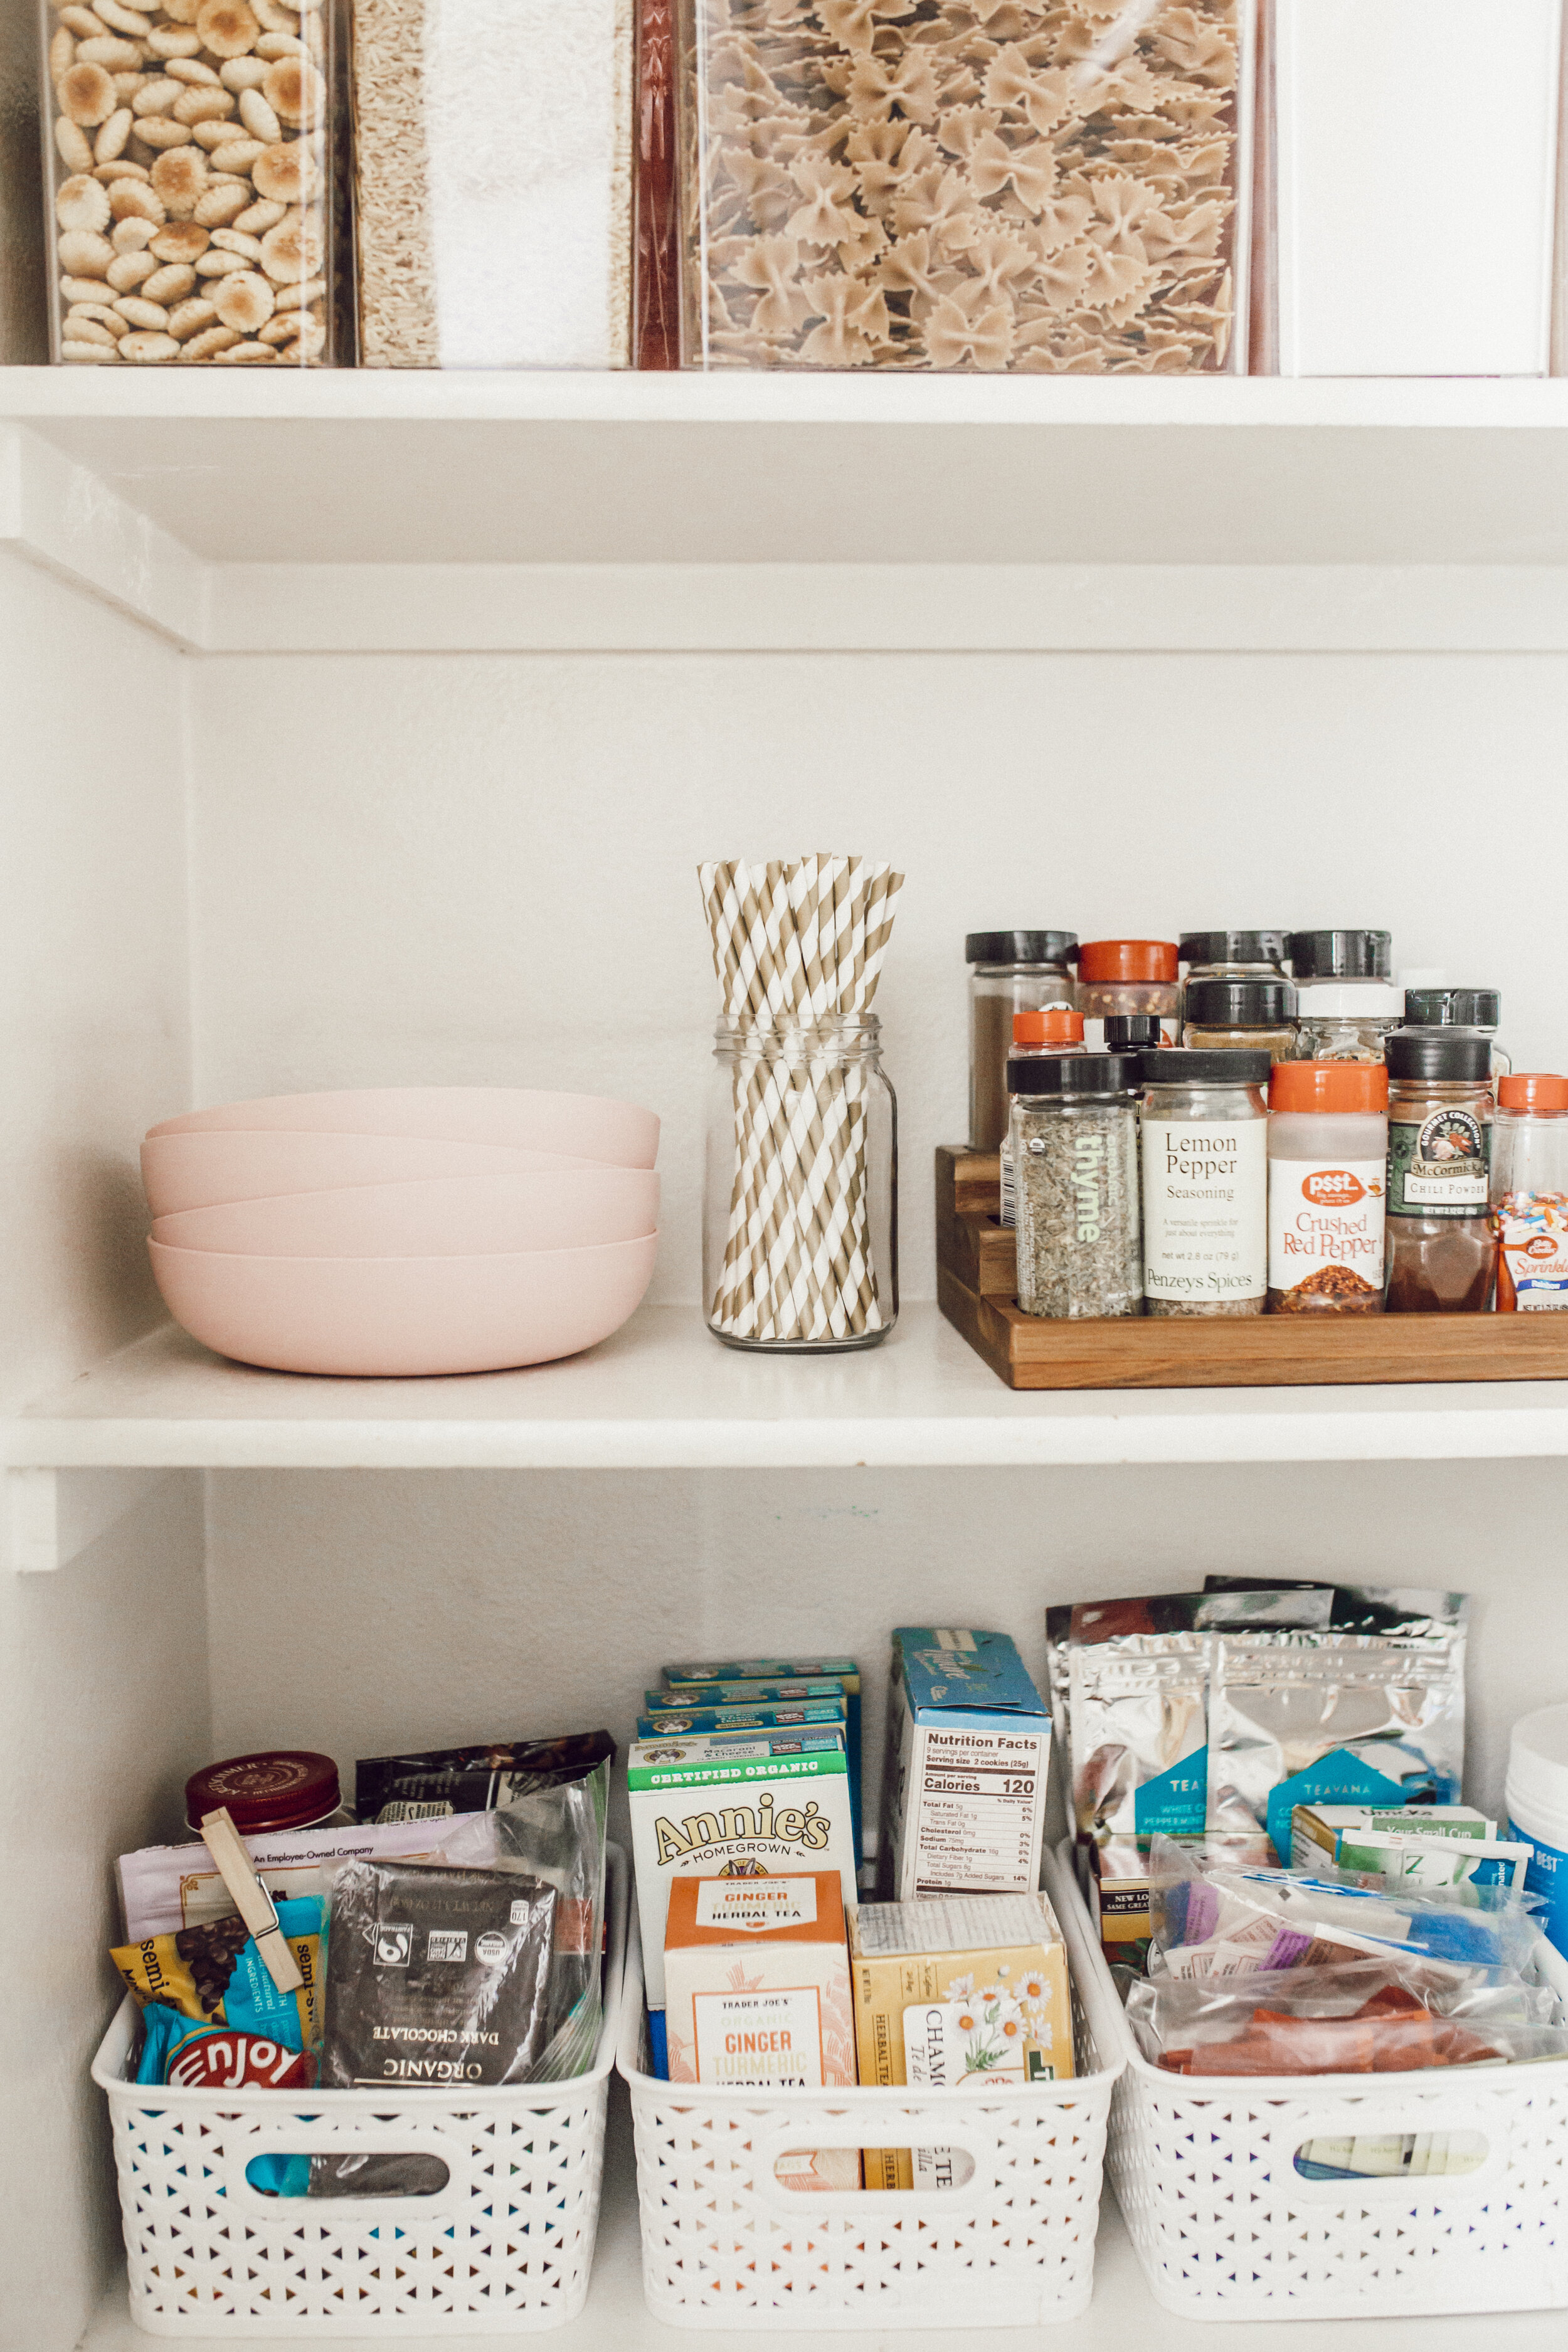 Where to Find Cute Inexpensive Storage Baskets - Organizing Moms